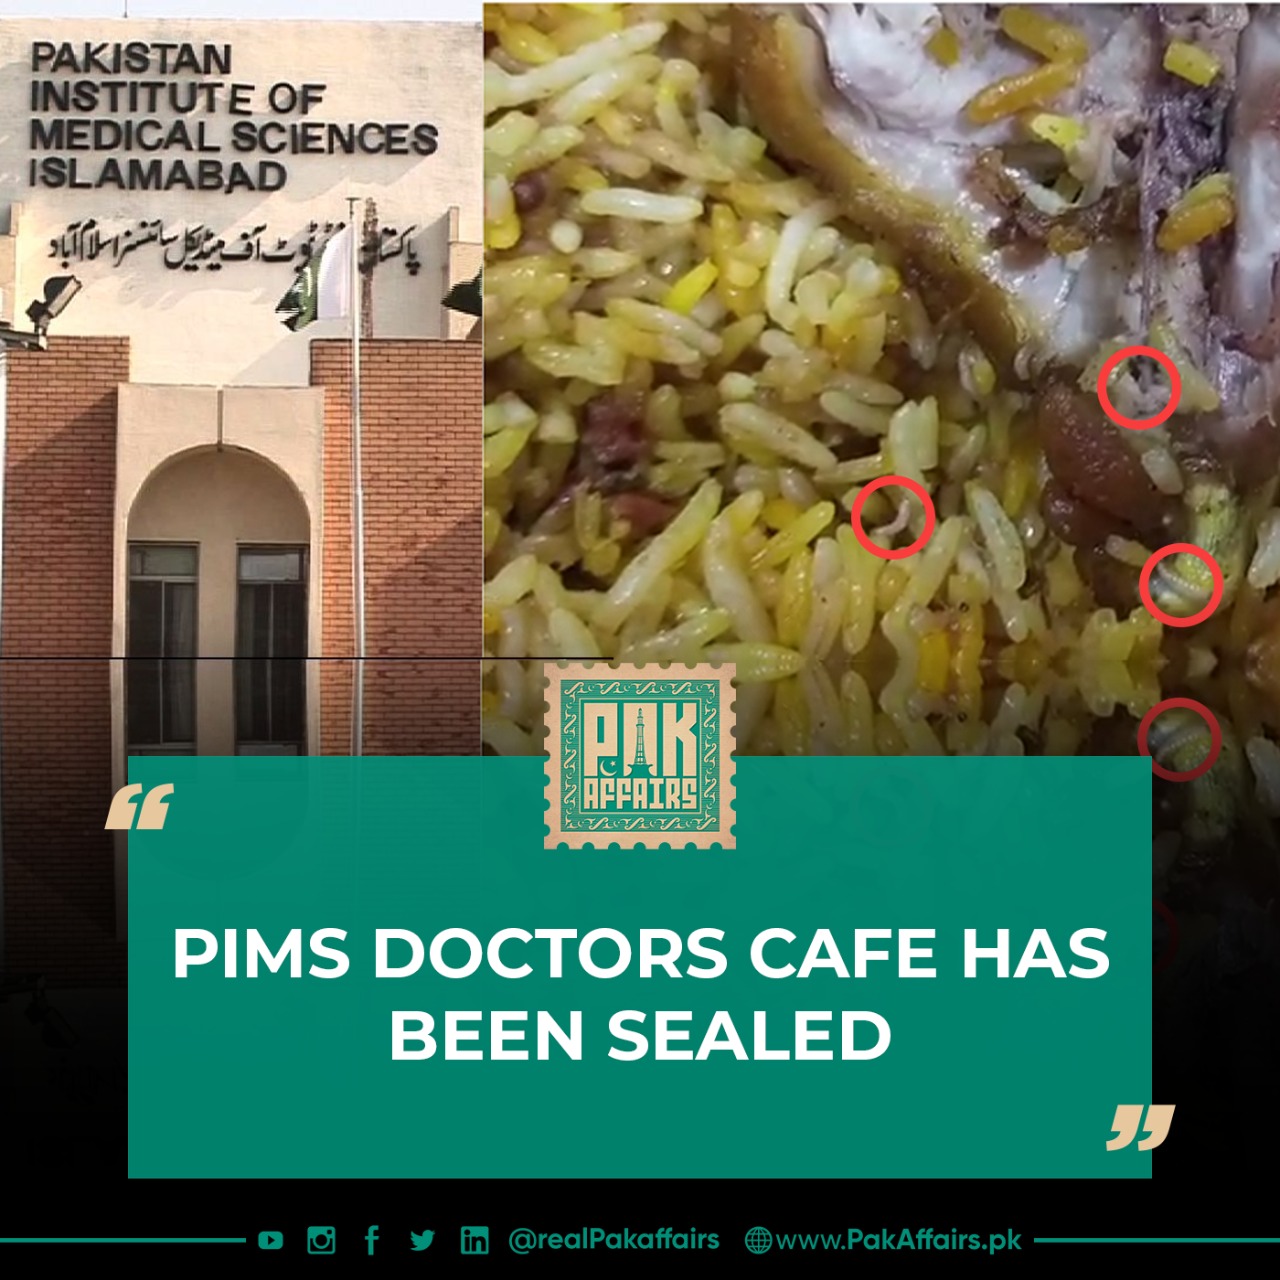 PIMS Doctors Cafe has been sealed